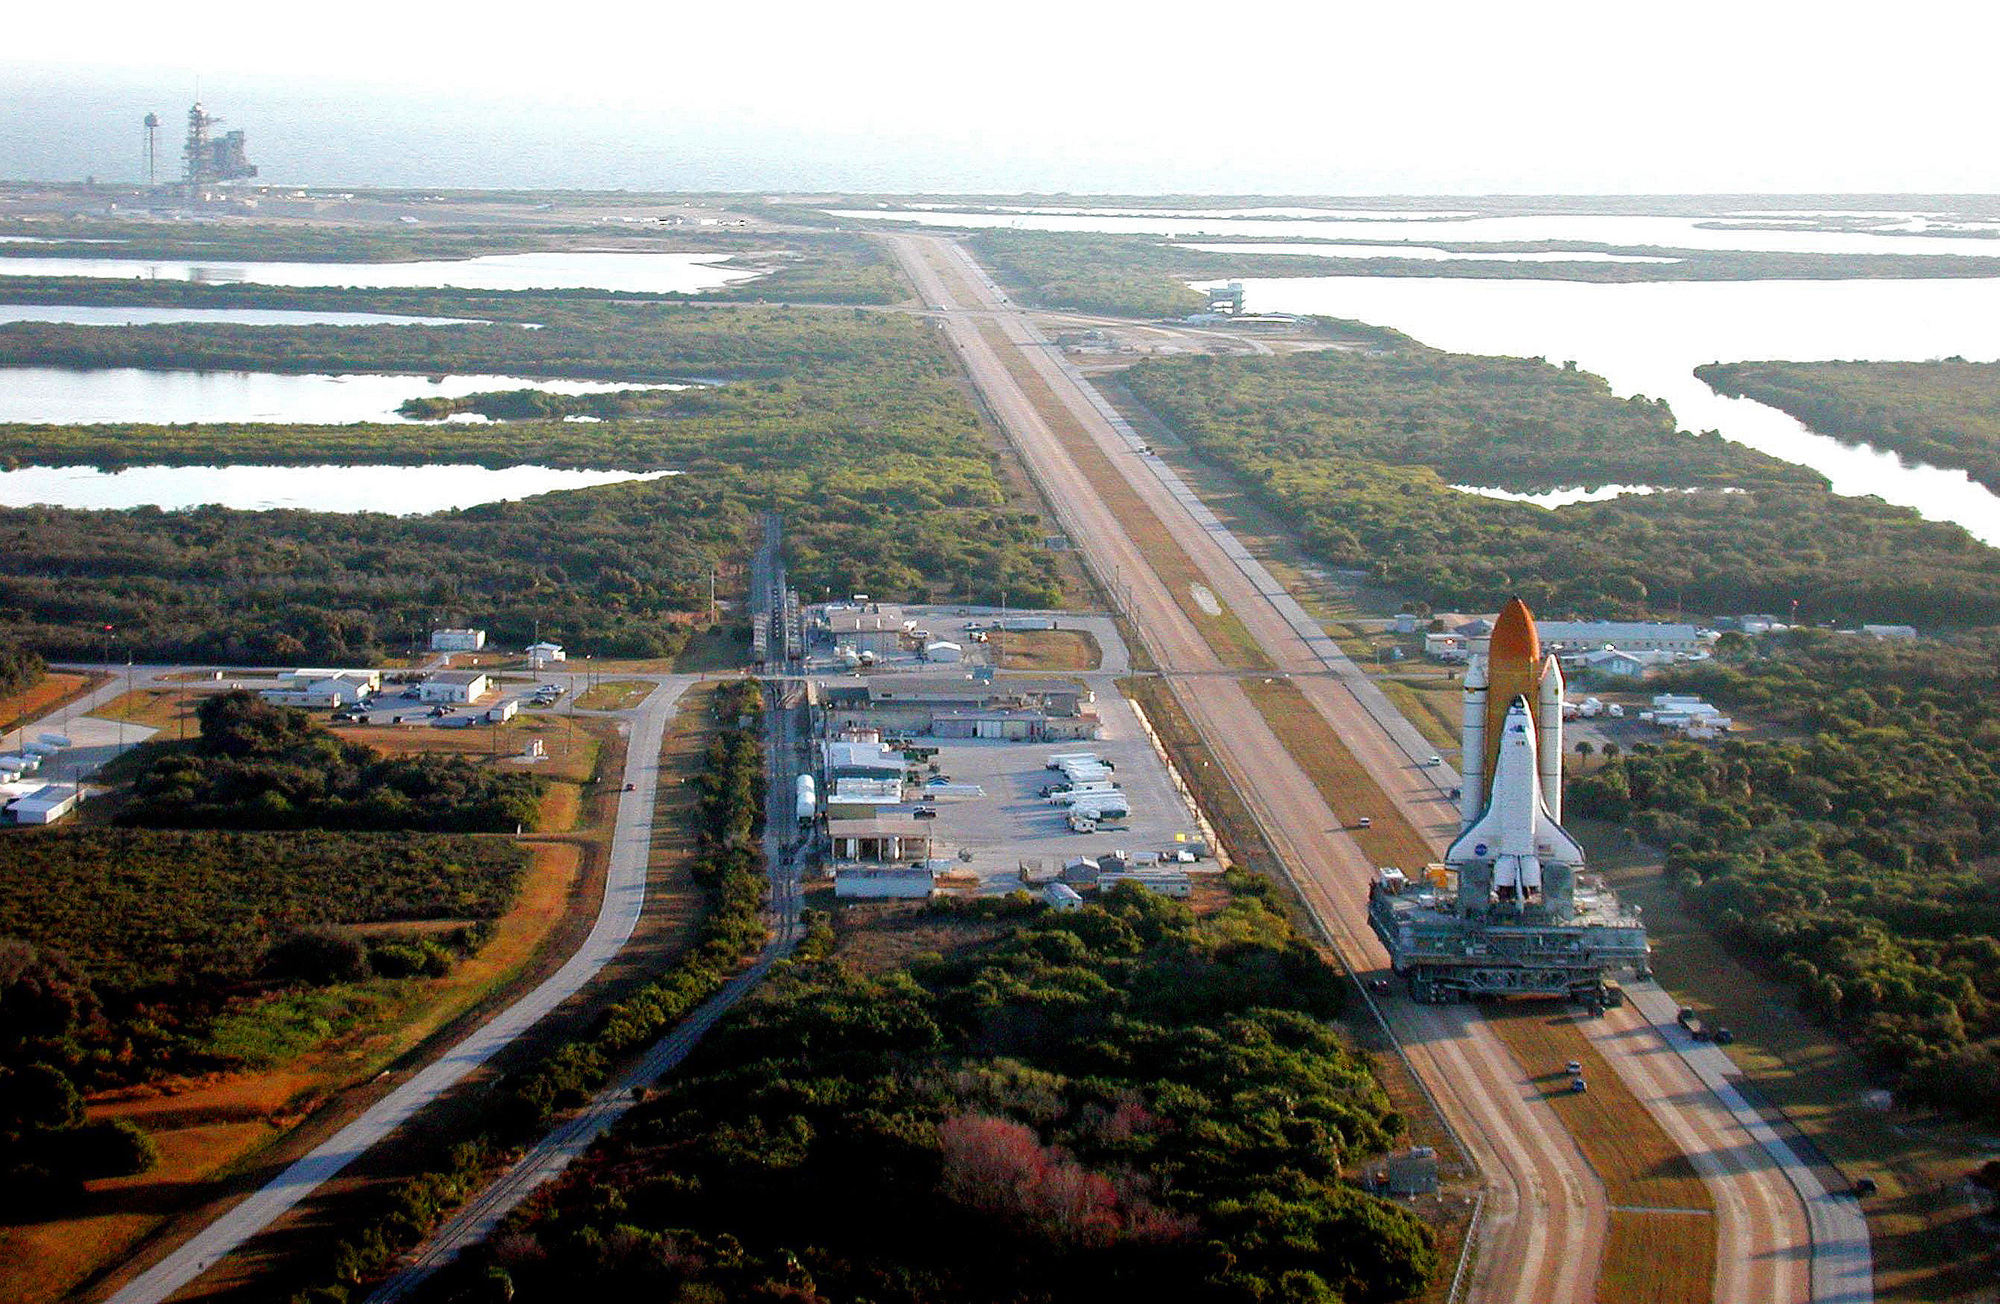 visit cape canaveral air force station